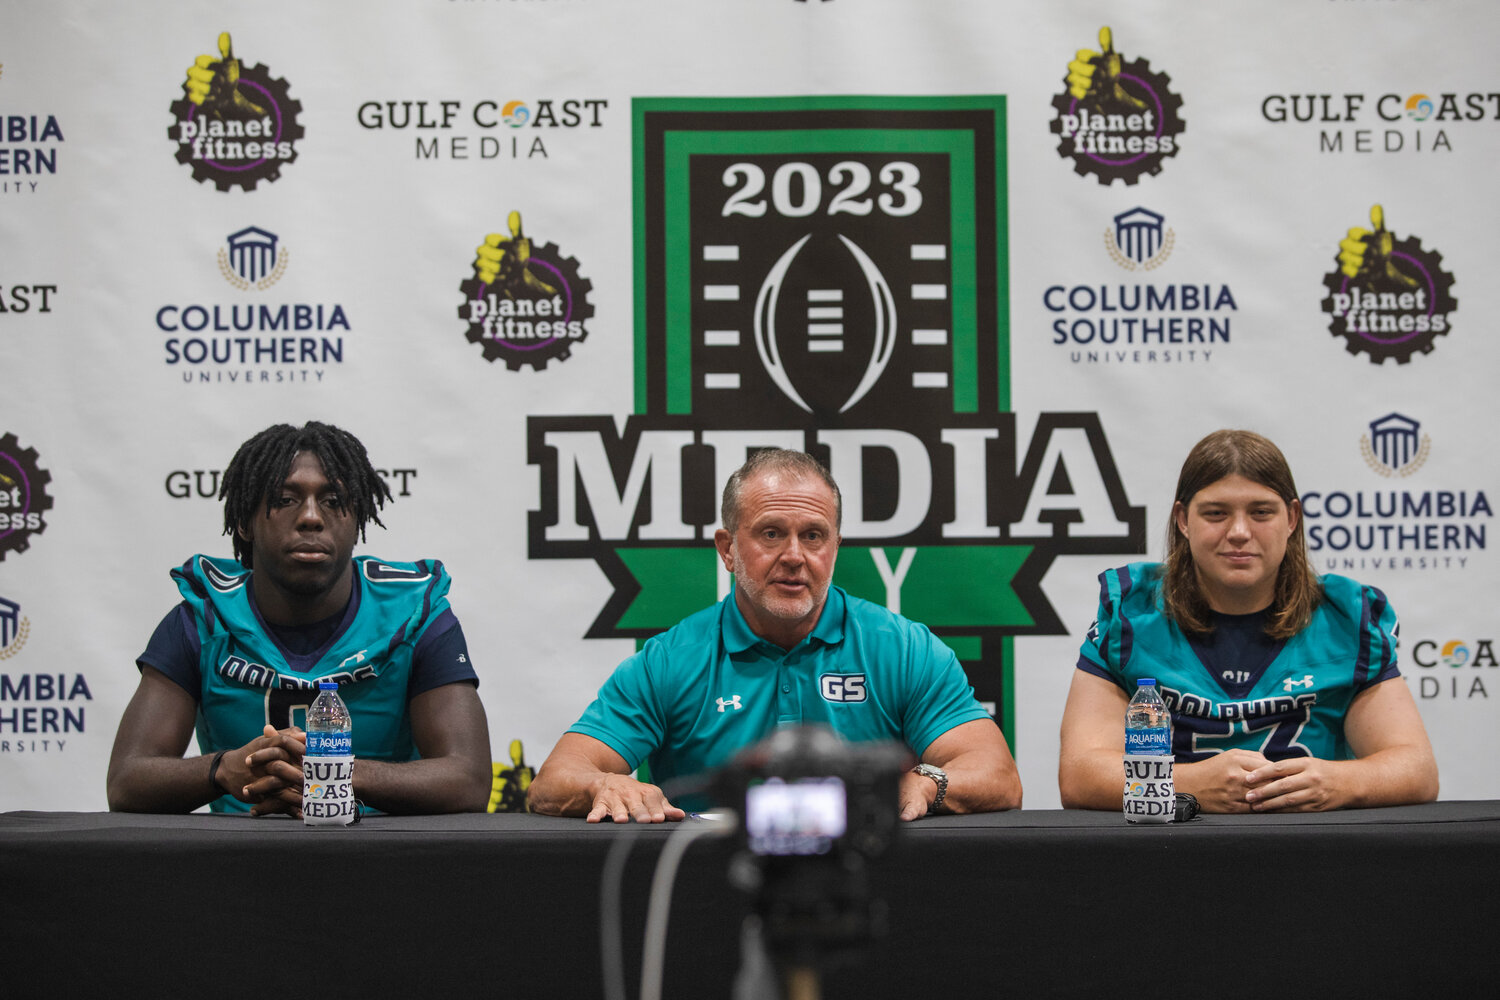 The Gulf Shores Dolphins were represented at Gulf Coast Media Day by Kingston Lowe, head coach Mark Hudspeth and Chase Jennings on Thursday, July 27. They were among the Baldwin County teams that previewed their upcoming seasons.